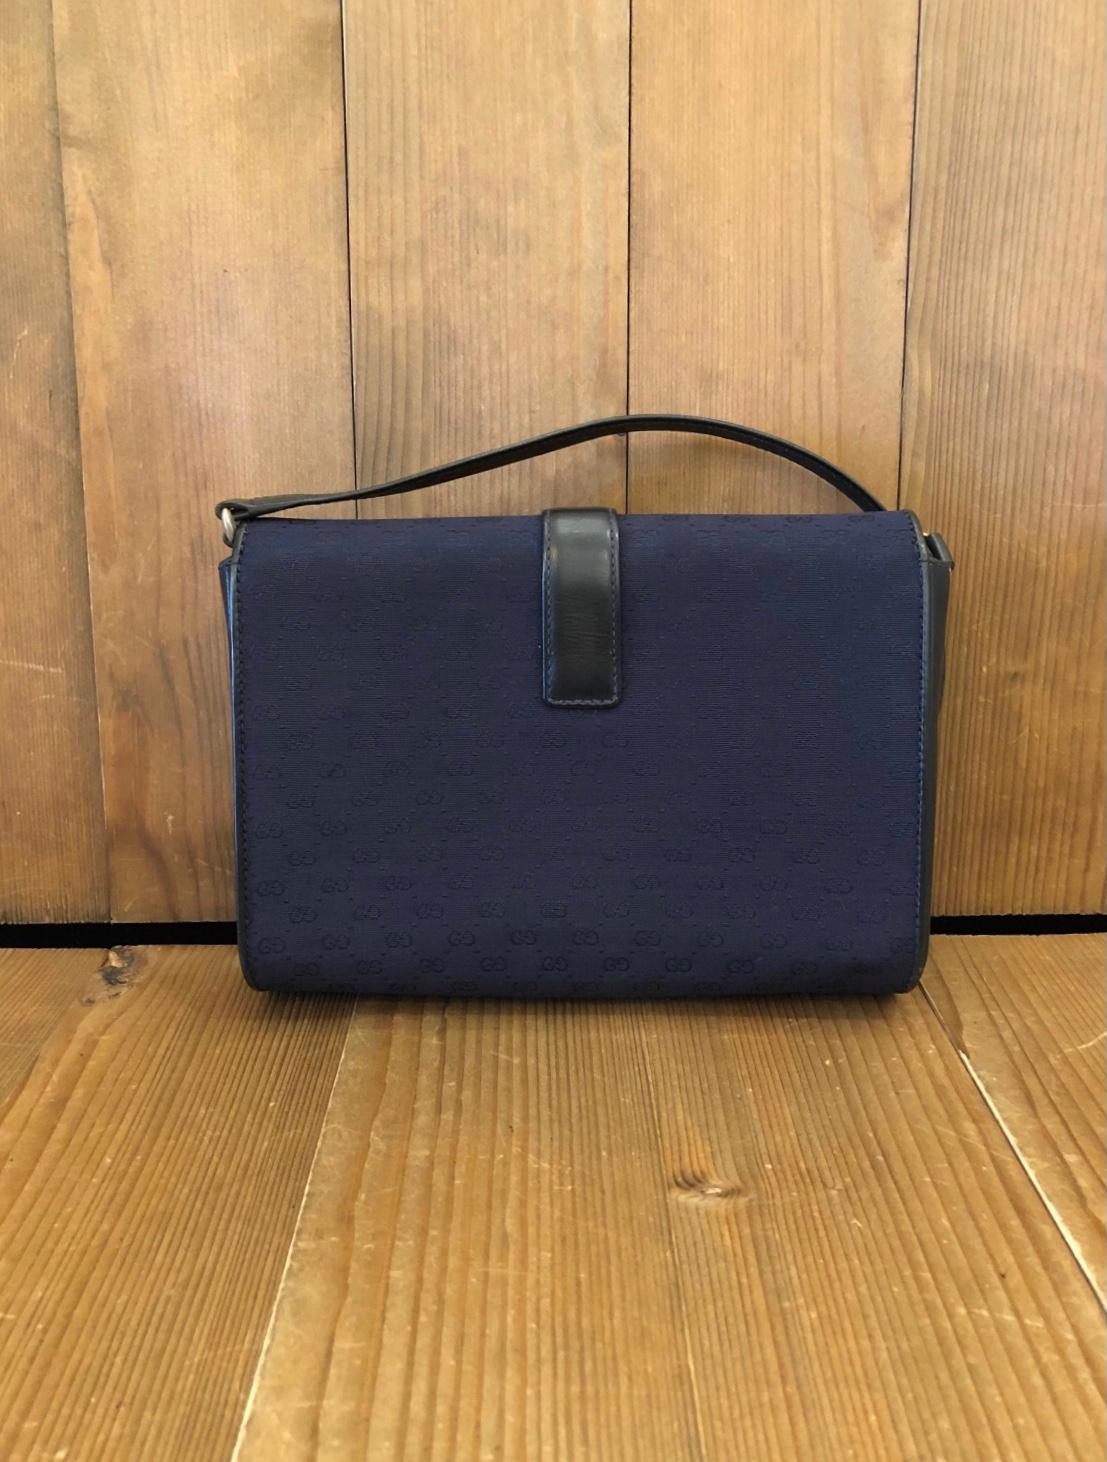 This Vintage GUCCI shoulder bag is crafted of micro GG jacquard in navy trimmed with navy smooth leather. Front flap turnlock closure opens to a navy leather interior featuring a zippered pocket. Made in Italy. Measures approximately 8.75 x 6 x 2